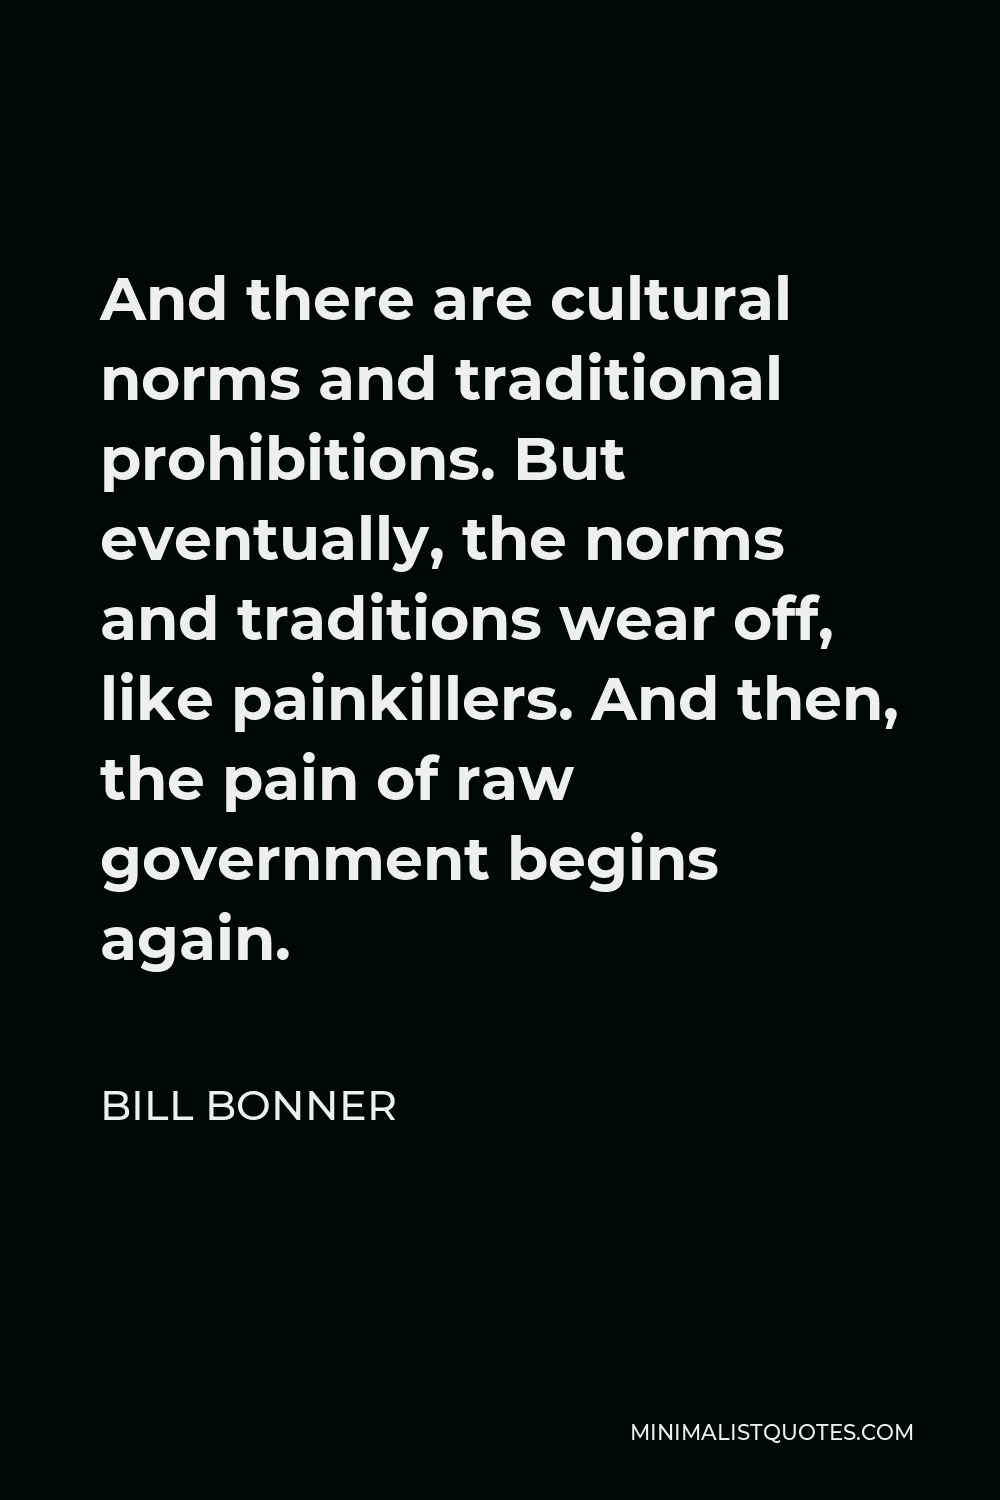 Bill Bonner Quote - And there are cultural norms and traditional prohibitions. But eventually, the norms and traditions wear off, like painkillers. And then, the pain of raw government begins again.